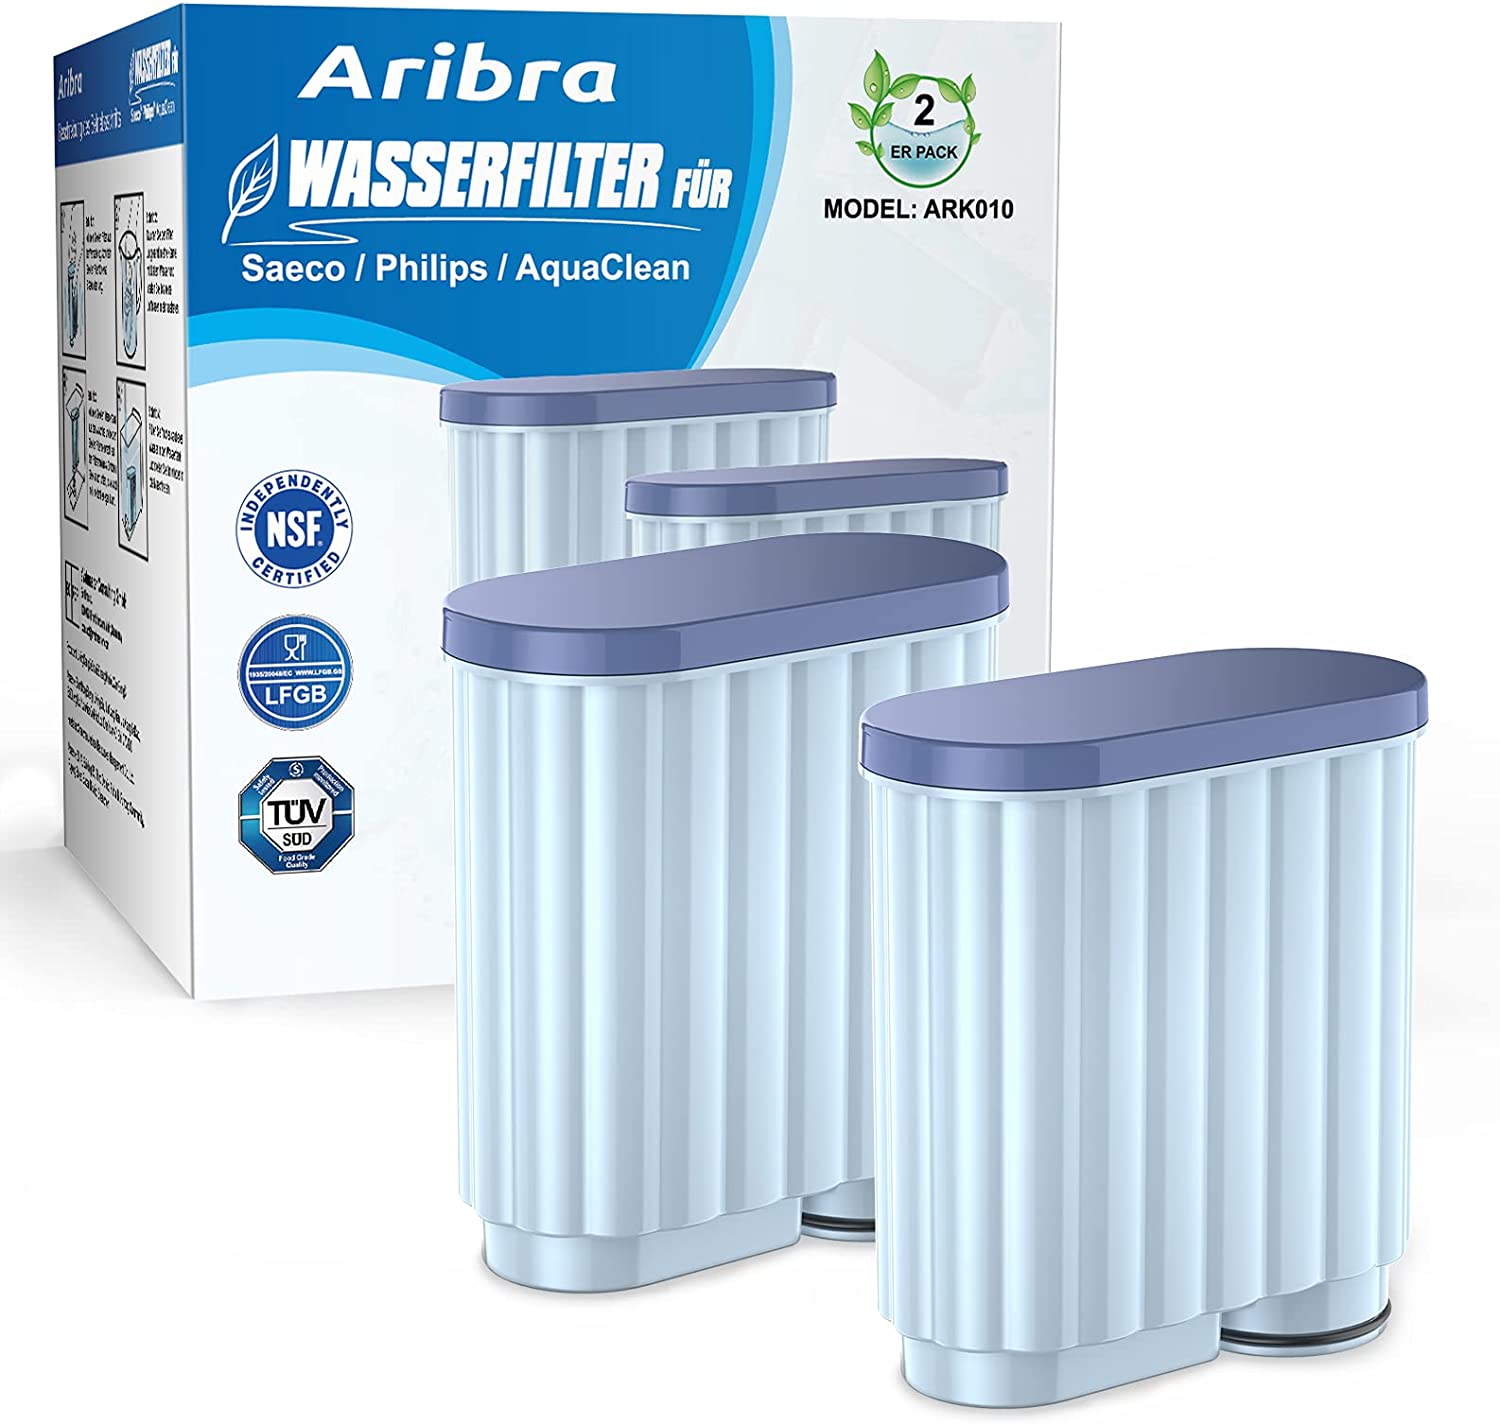 Aribra Water Filter for Philips Fully Automatic Coffee Machine, Water Filter for Philips AquaClean CA6903/10, CA6707 Limescale Filter, Filter Cartridge applies to Saeco and Philips Coffee Machine, Filter Cartridge Pack of 2